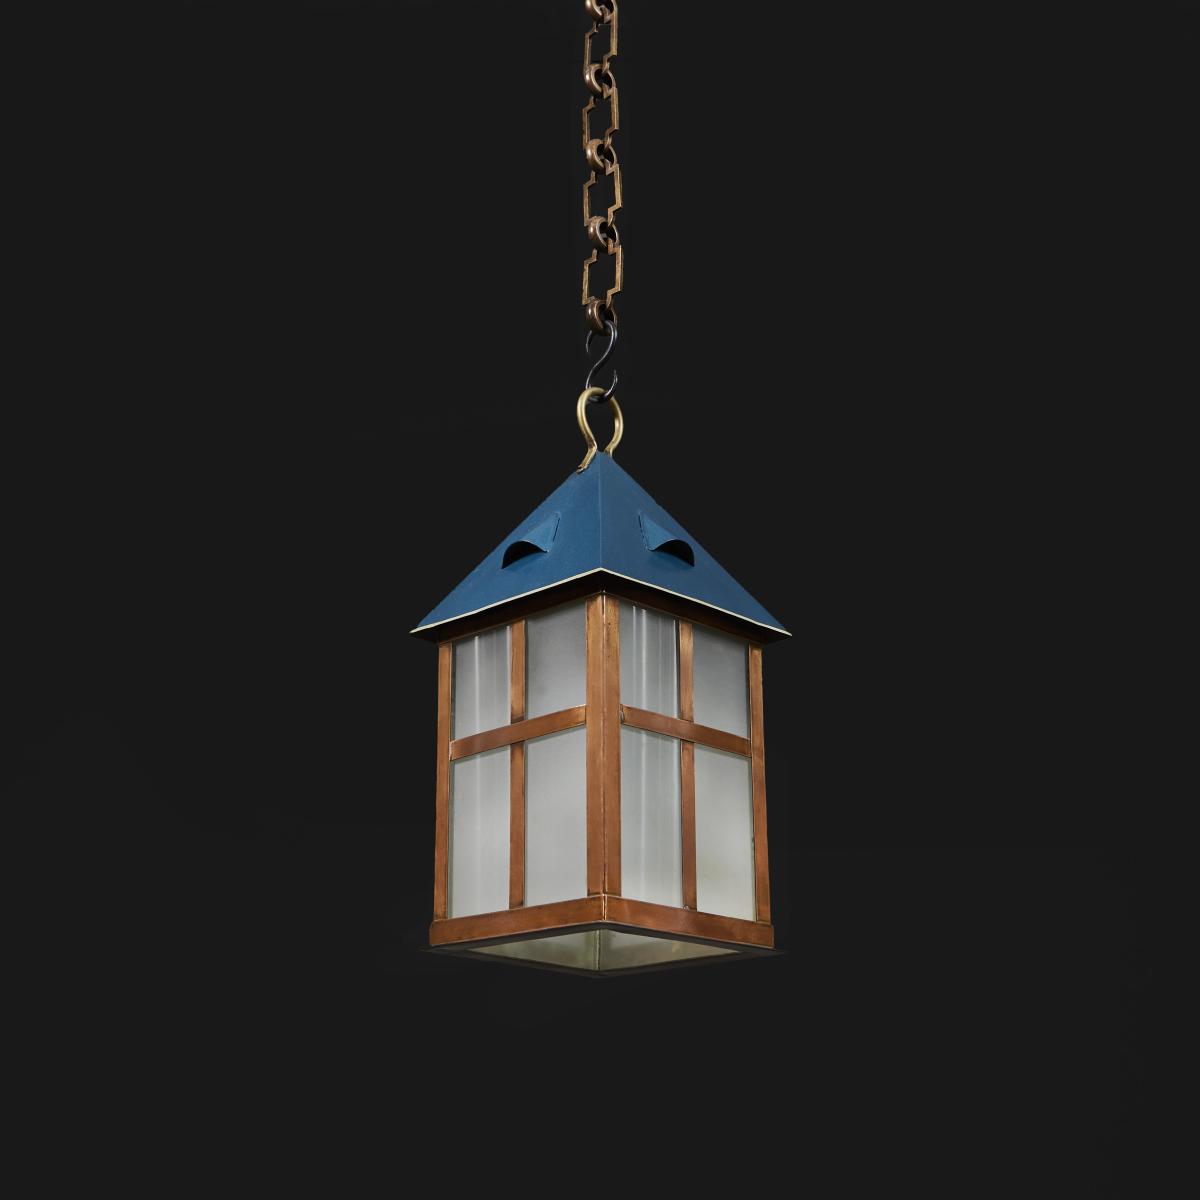 Copper Arts and Crafts Hanging Lantern